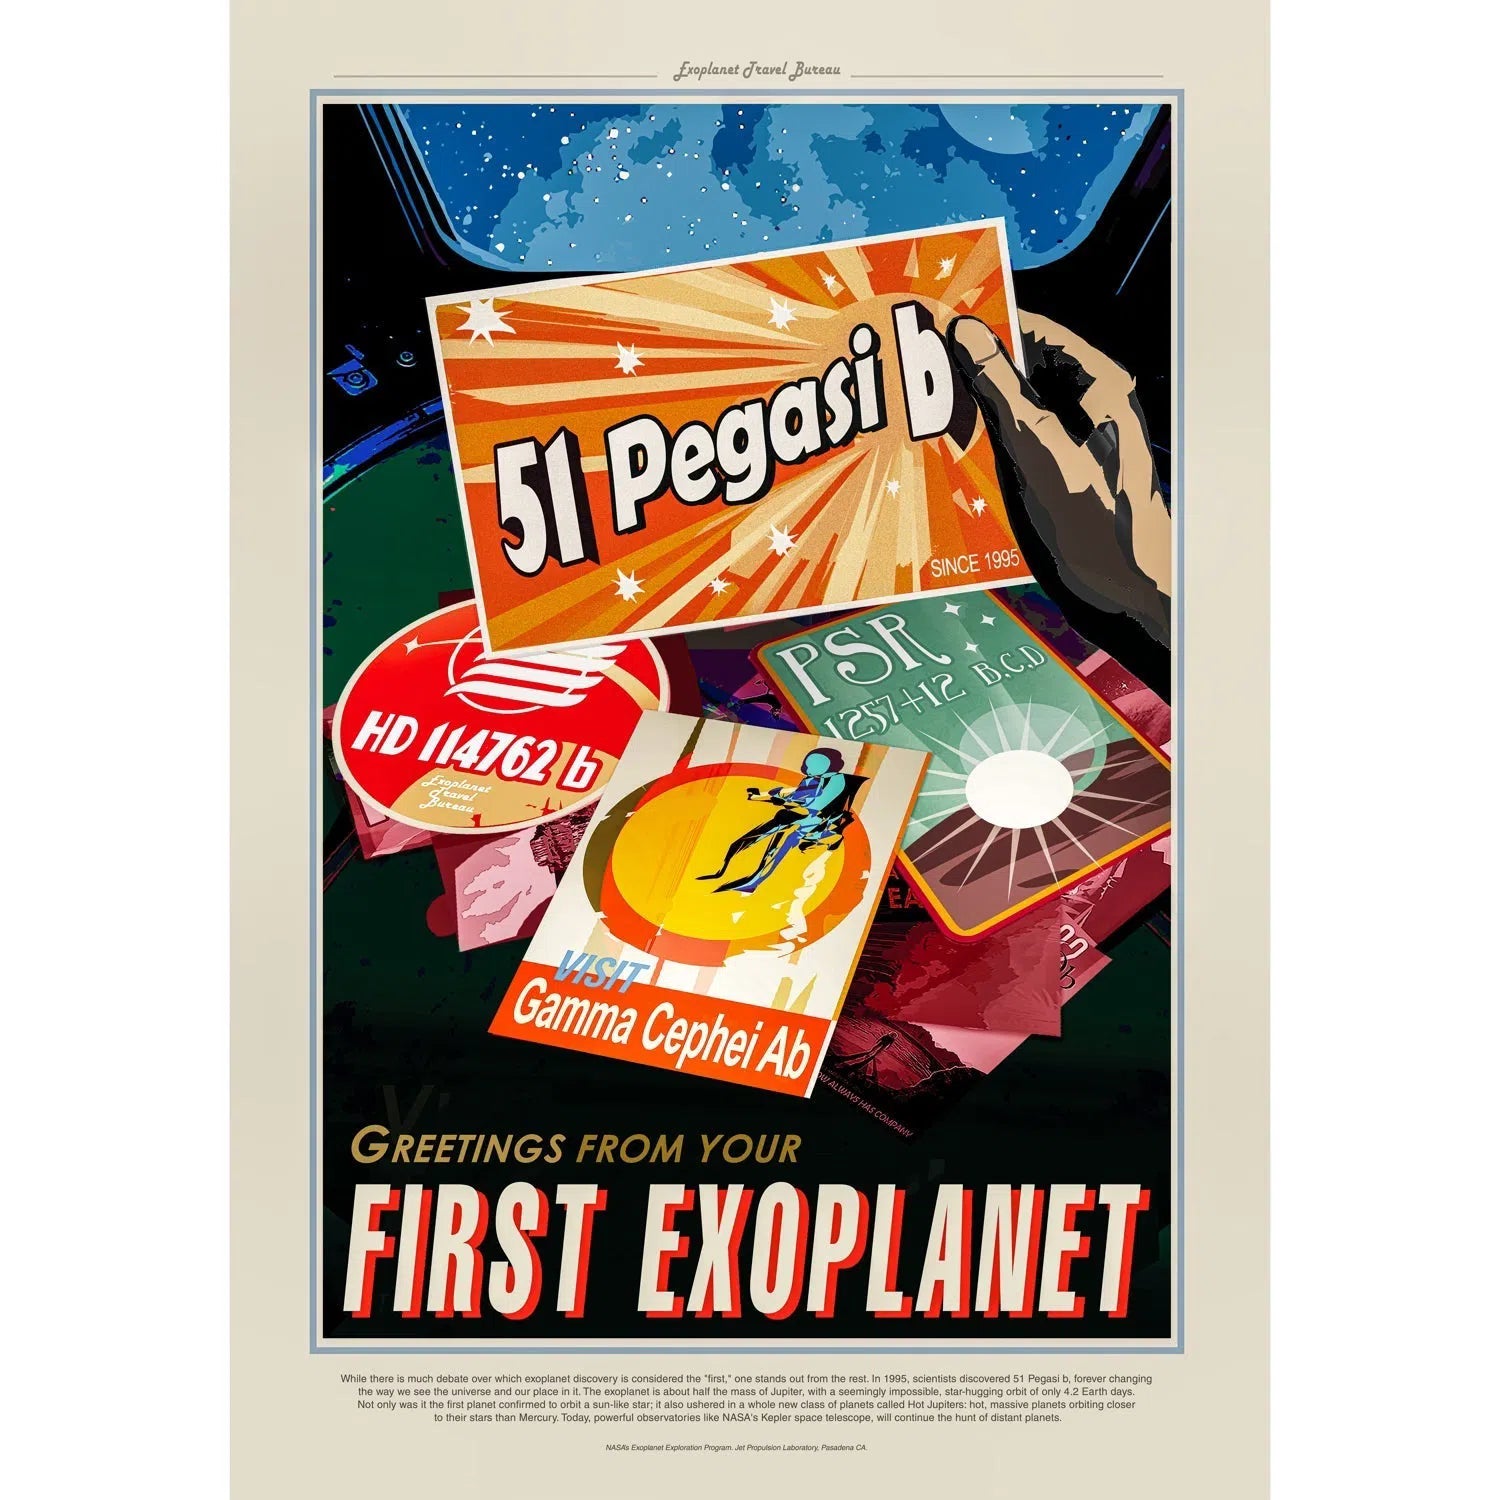 Greetings from your first exoplanet-Imagesdartistes